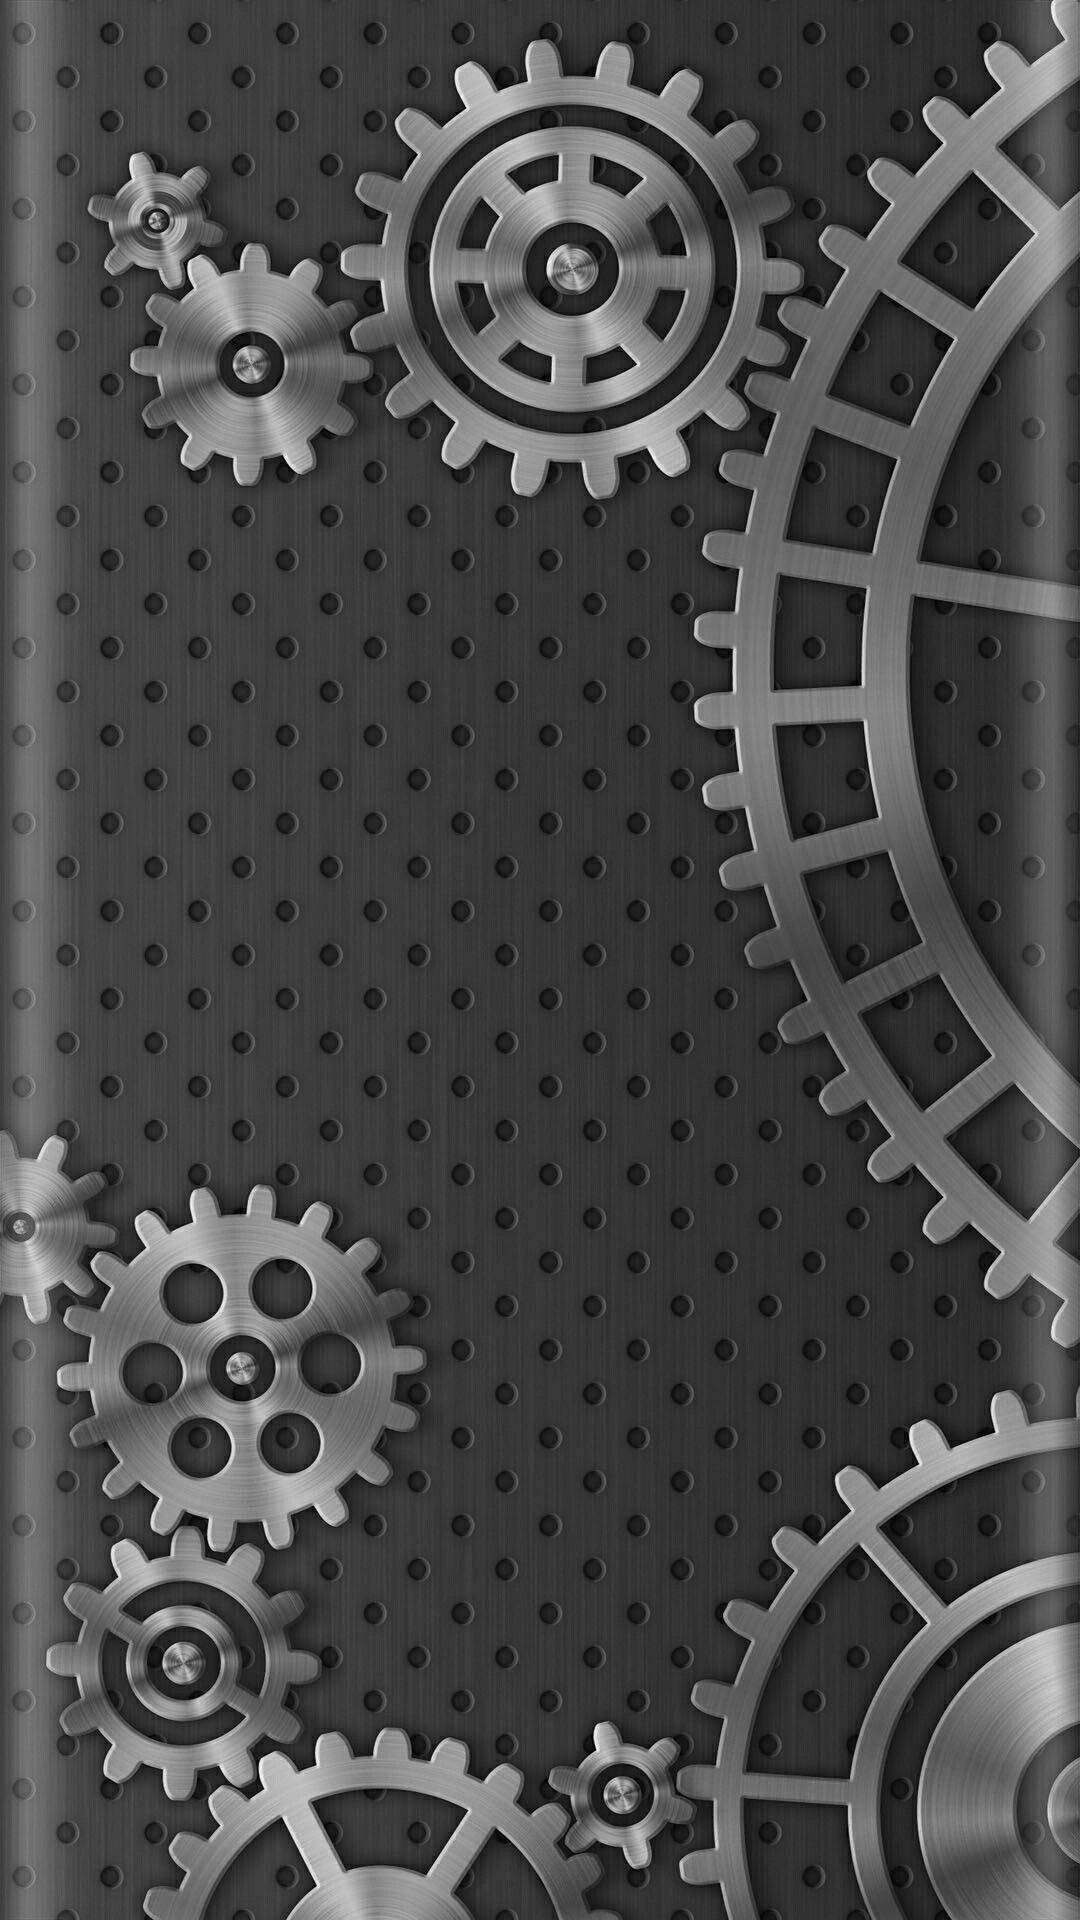 Gear Iphone Wallpapers